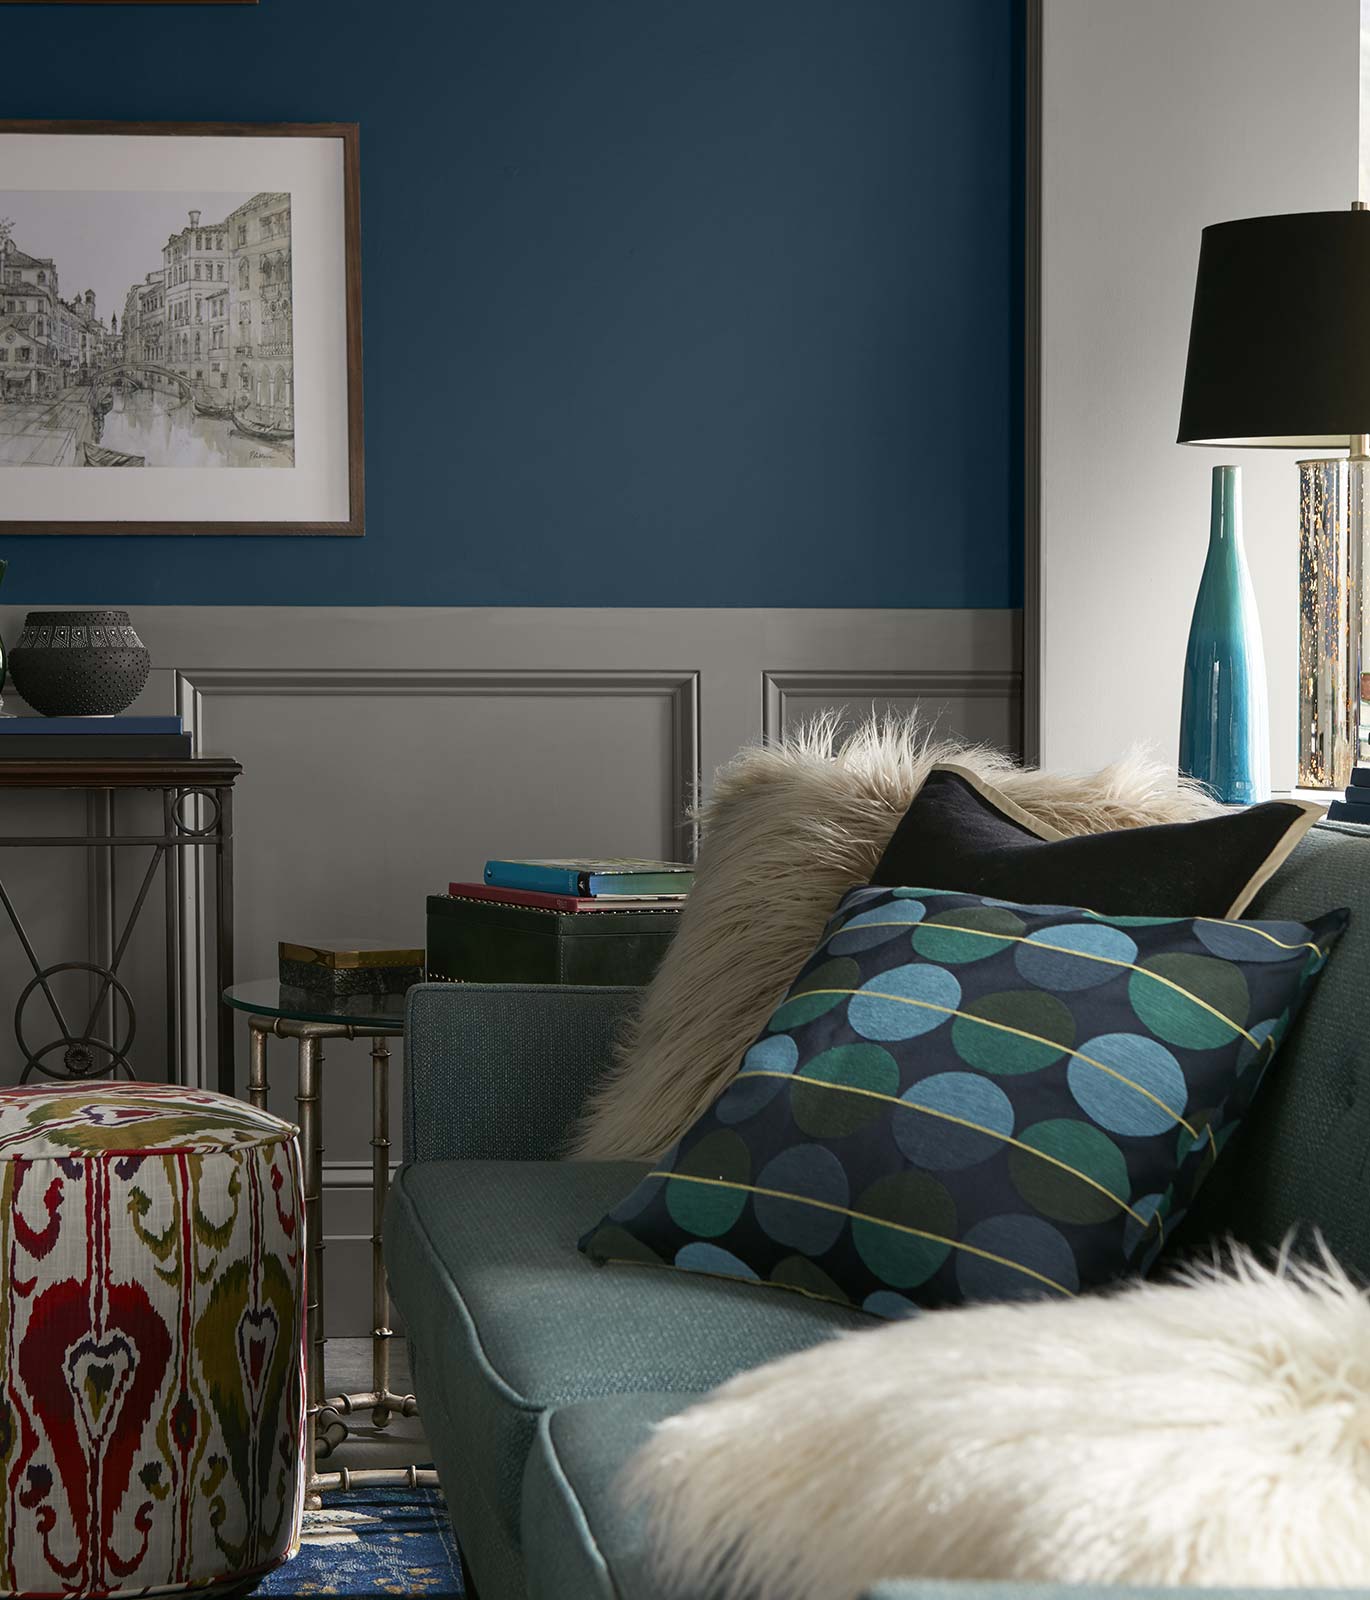 A tight crop of a living room with a light blue couch and darker blue painted walls. The mood is quiet and relaxed.